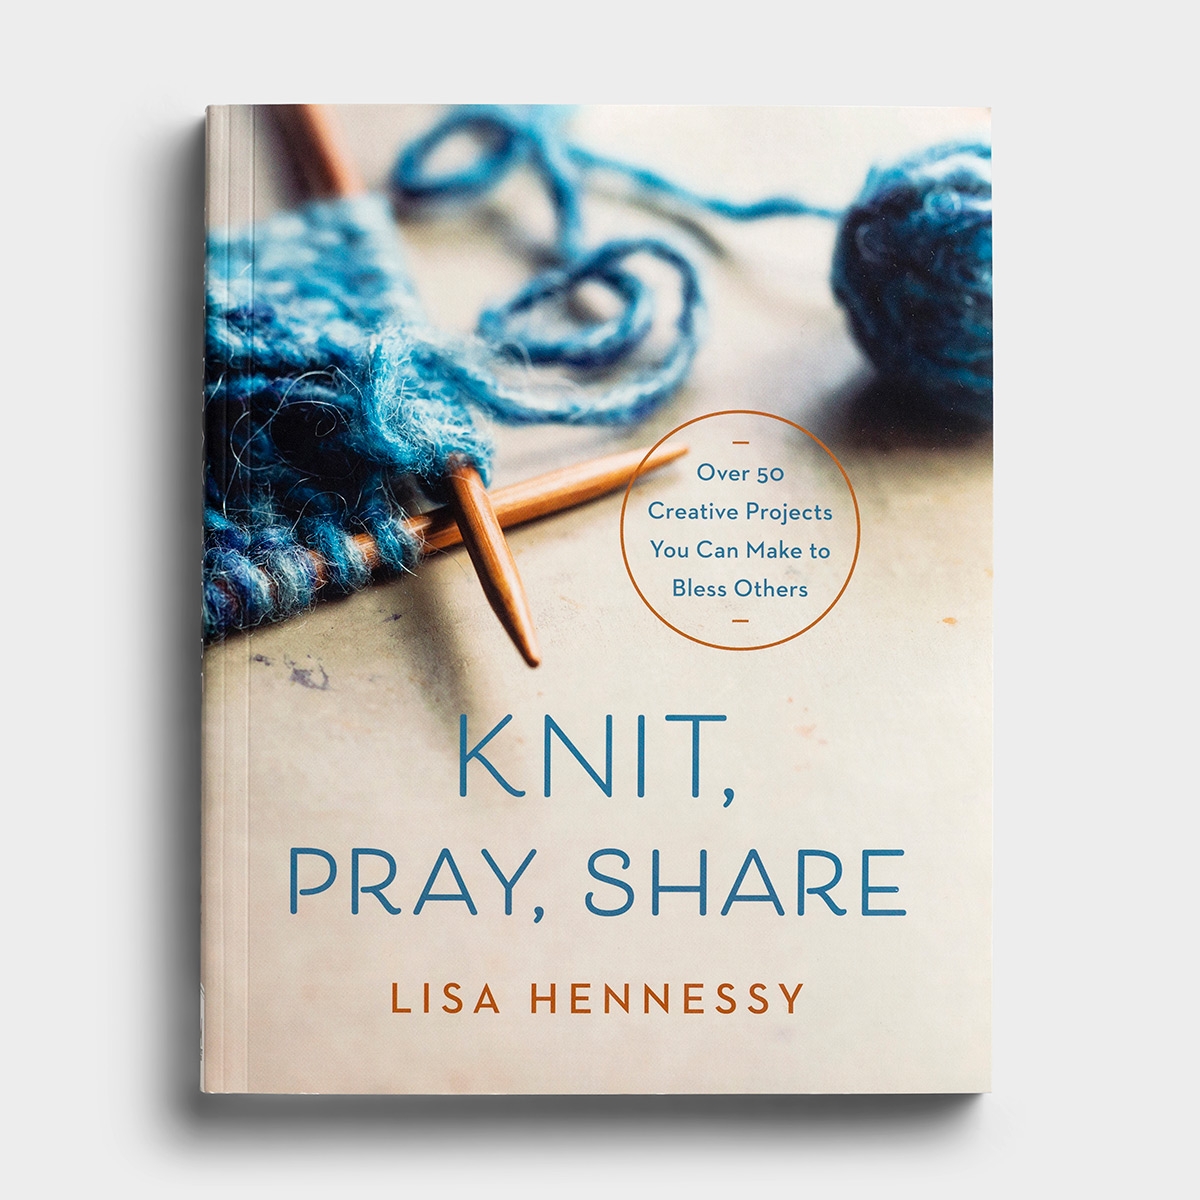 Knit, Pray, Share - Over 50 Creative Projects You Can Make to Bless Others